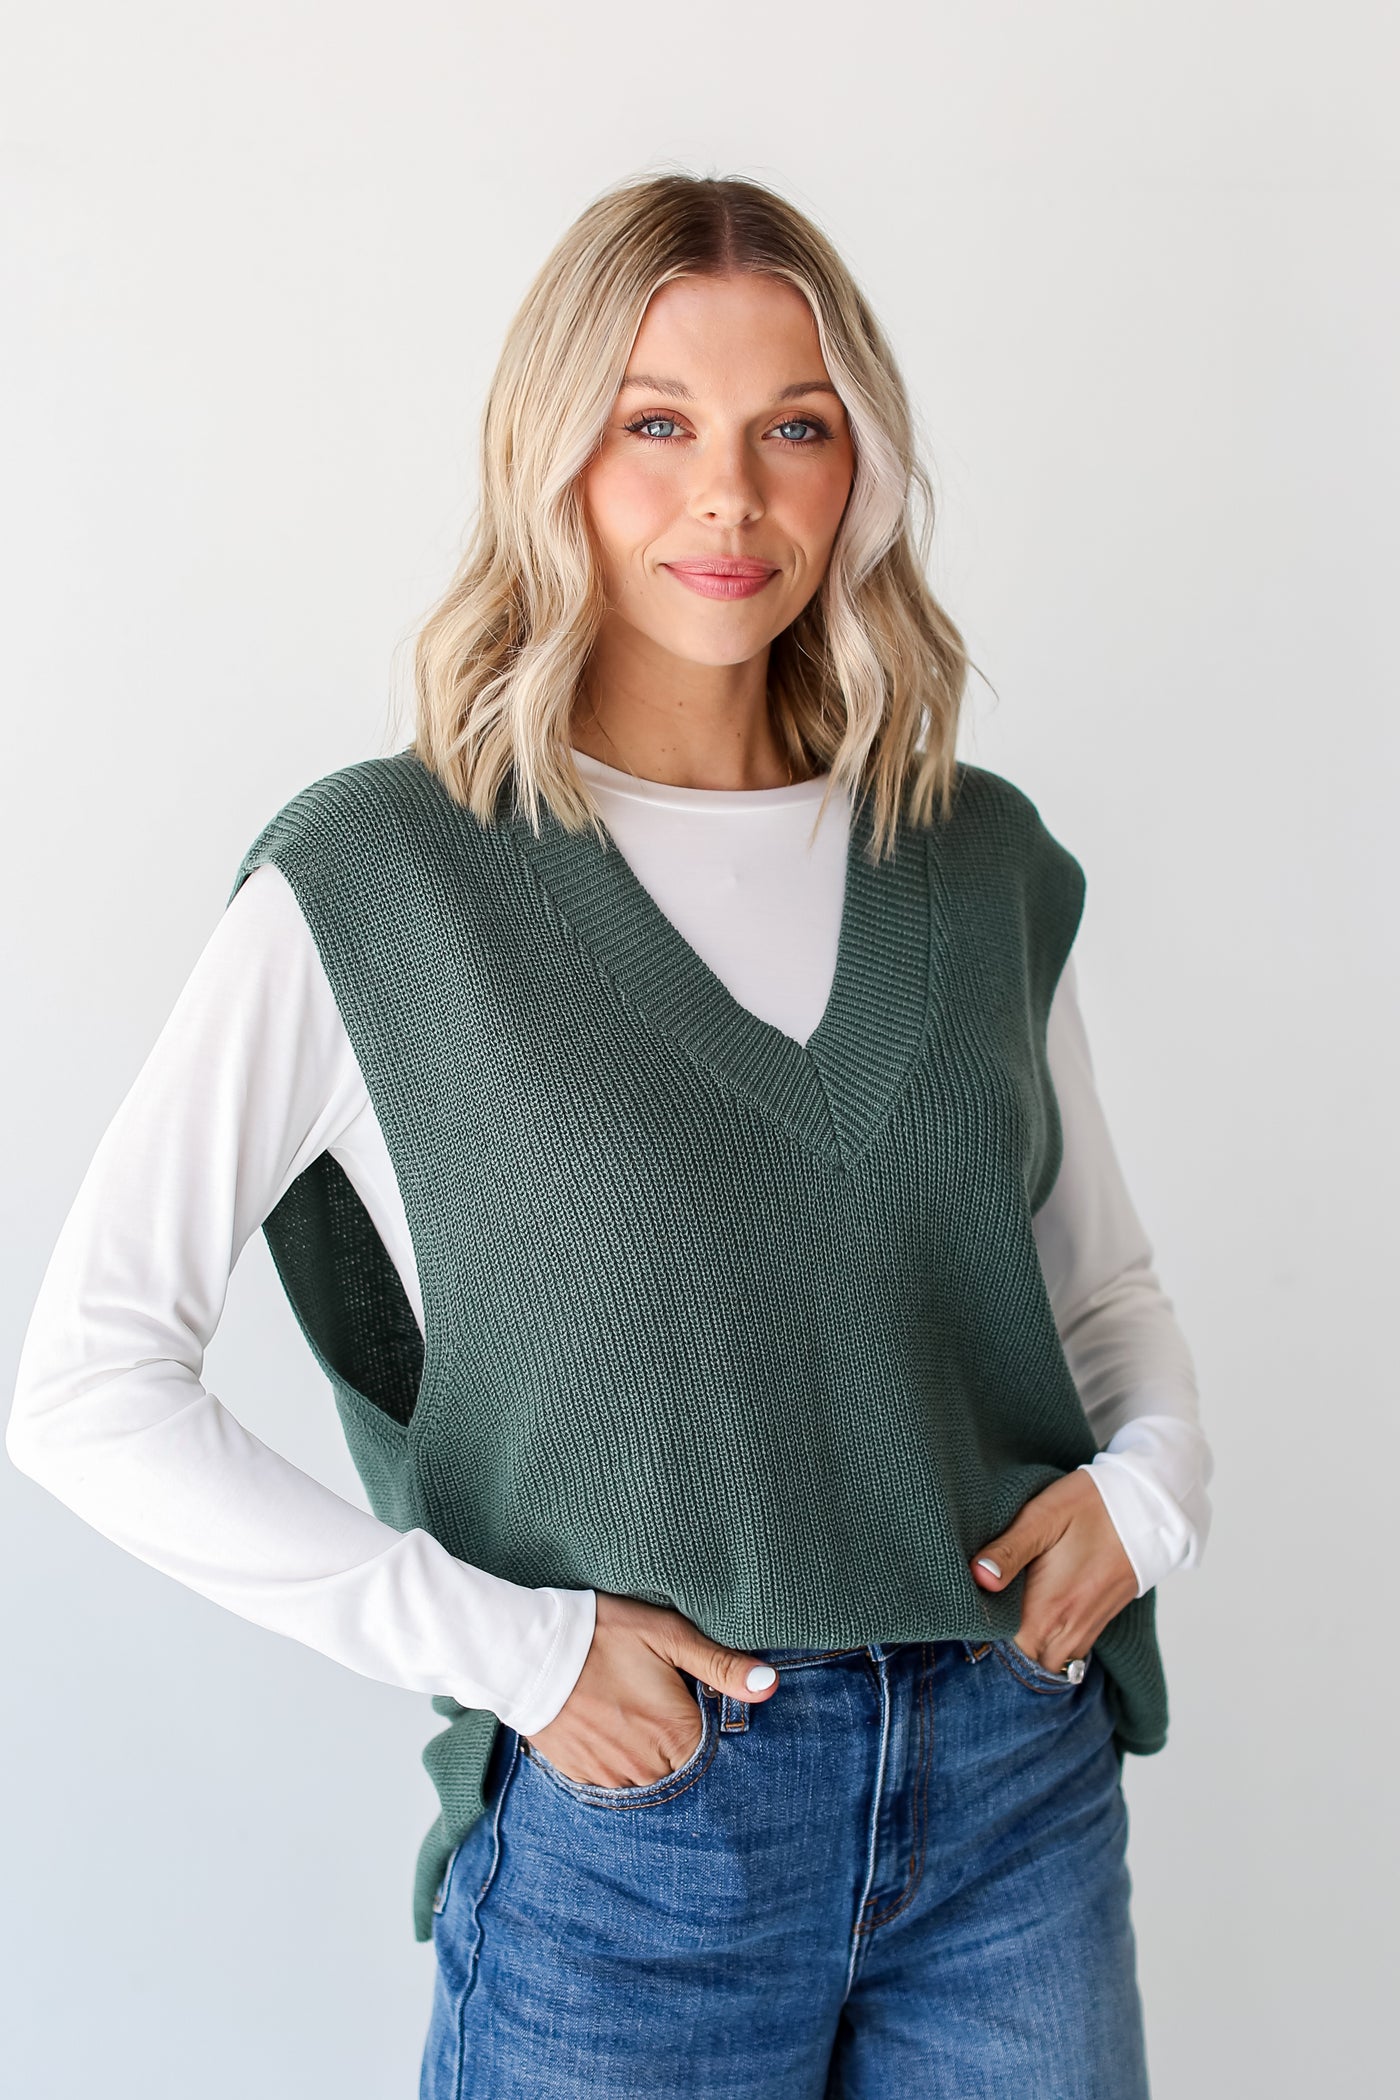 teal Oversized Sweater Vest front view